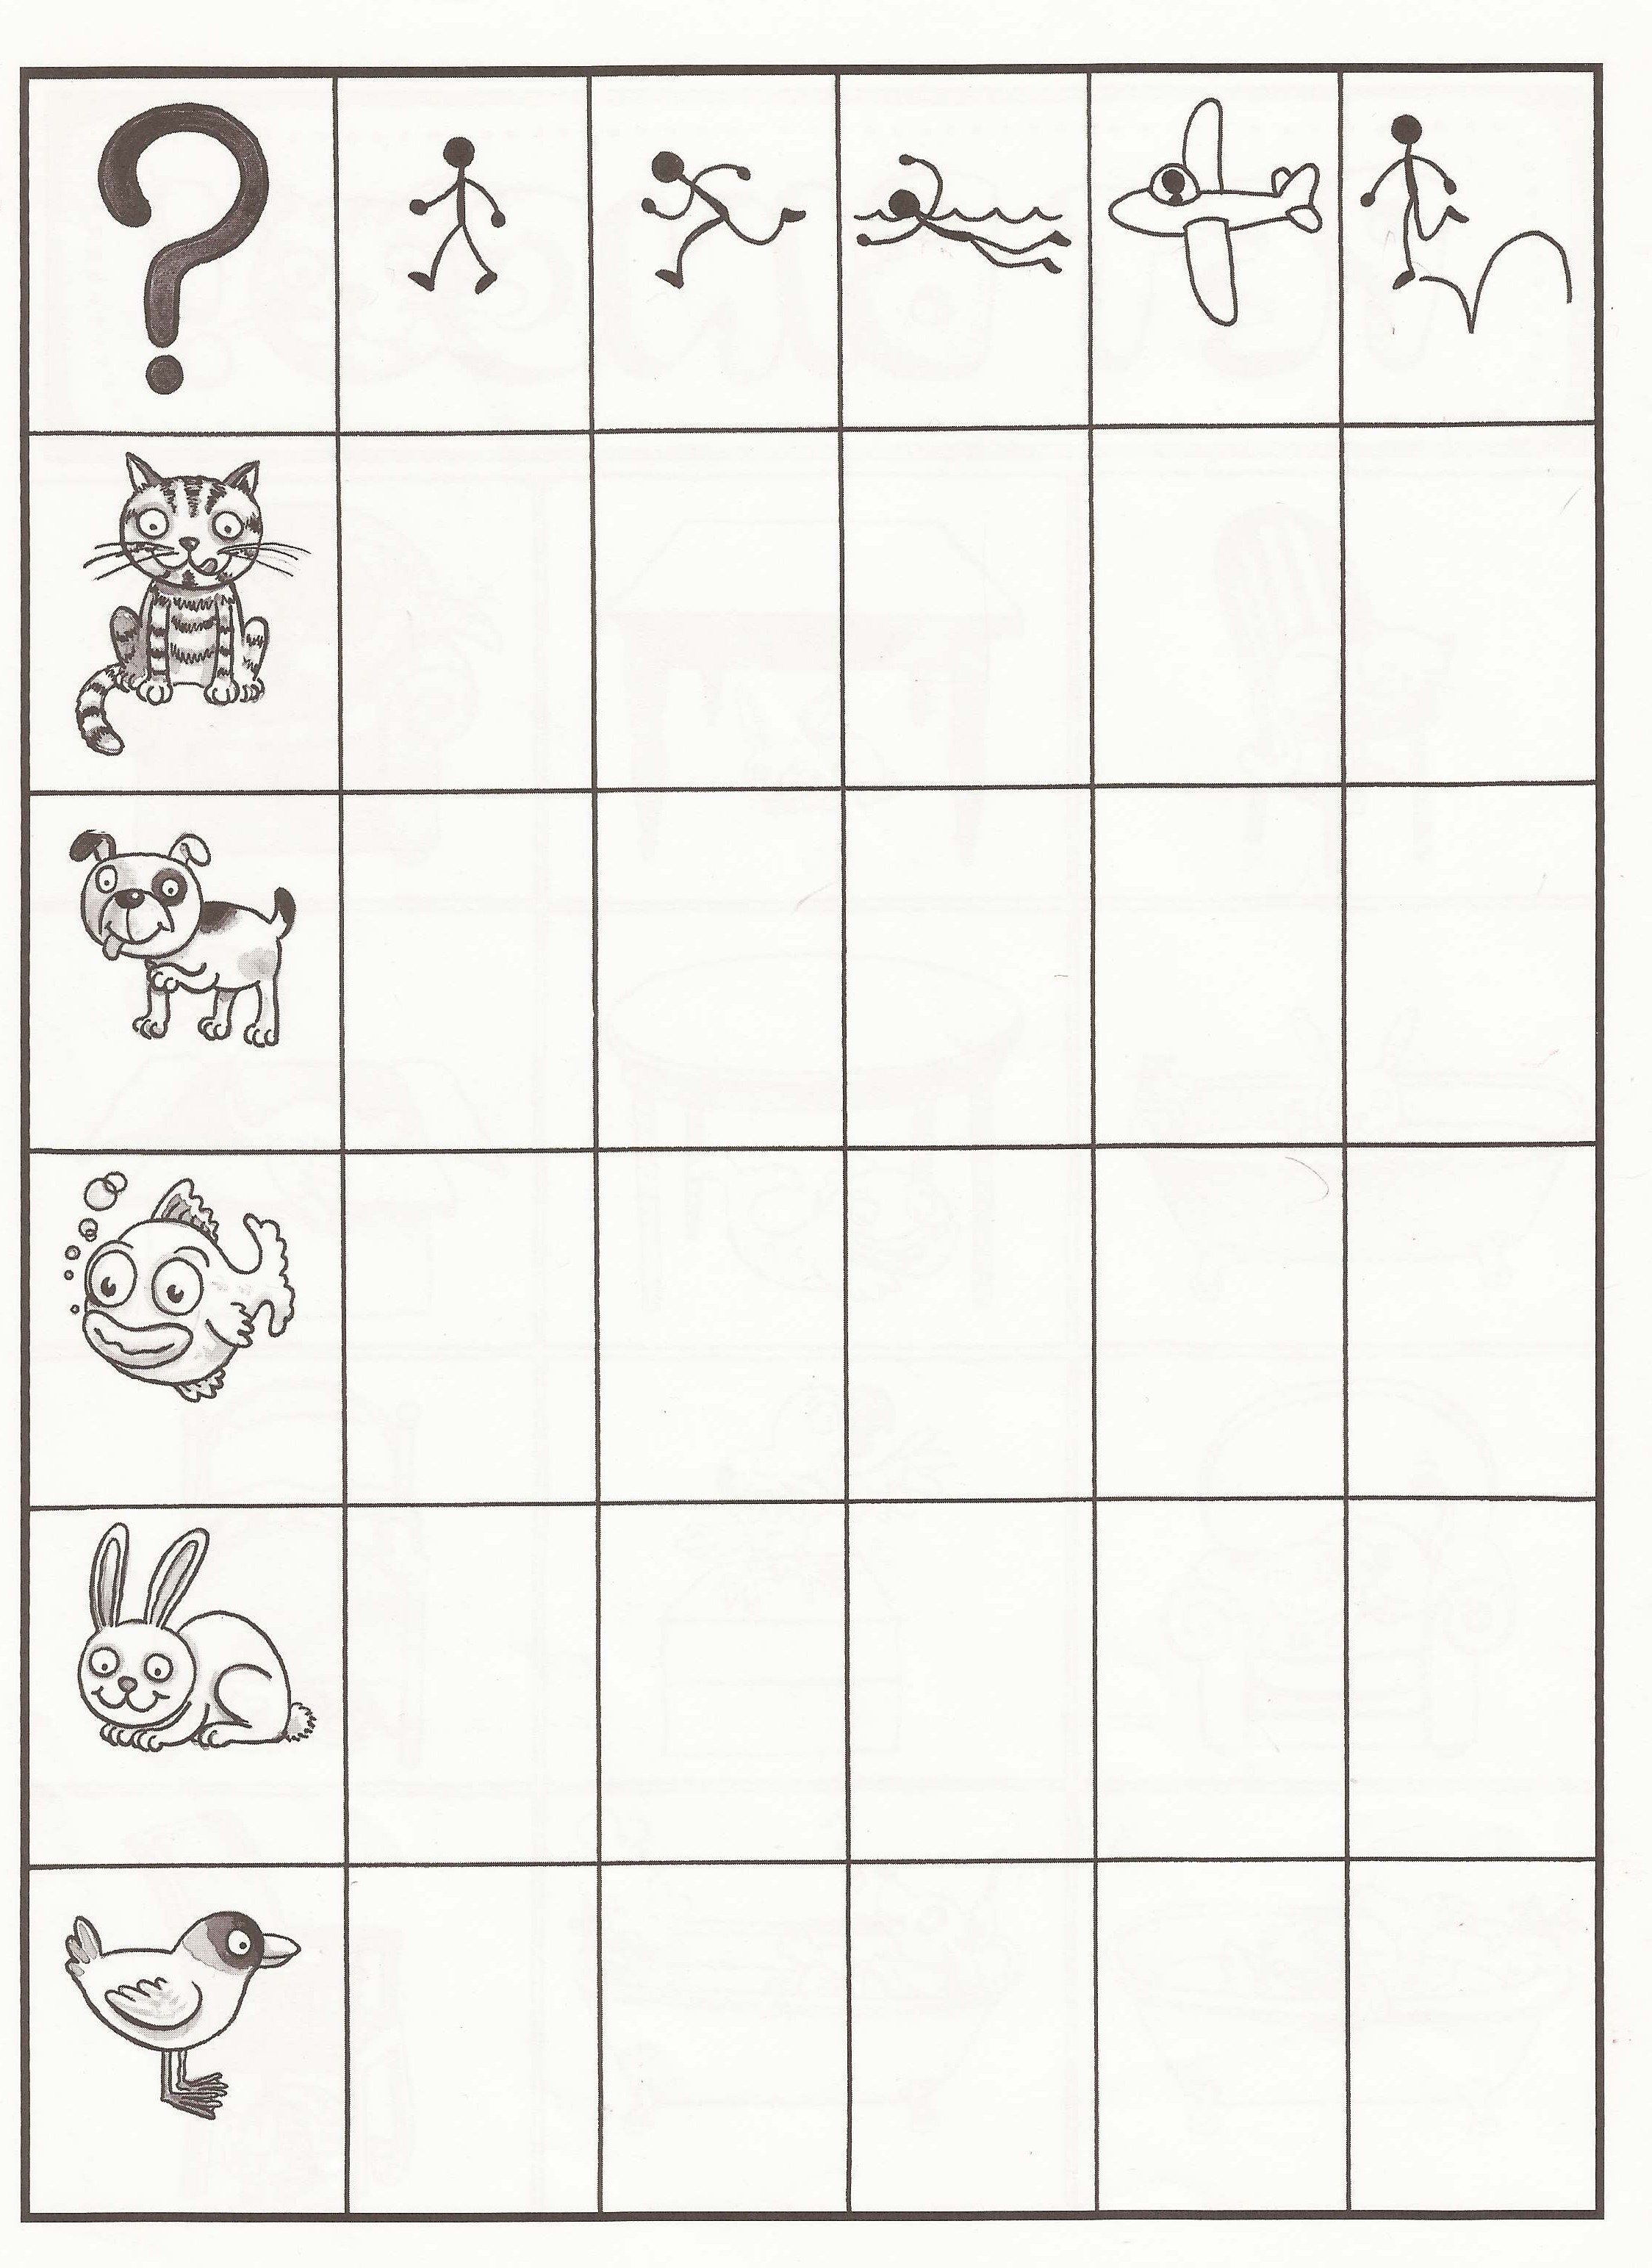 worksheet actions Actions Animal  animal